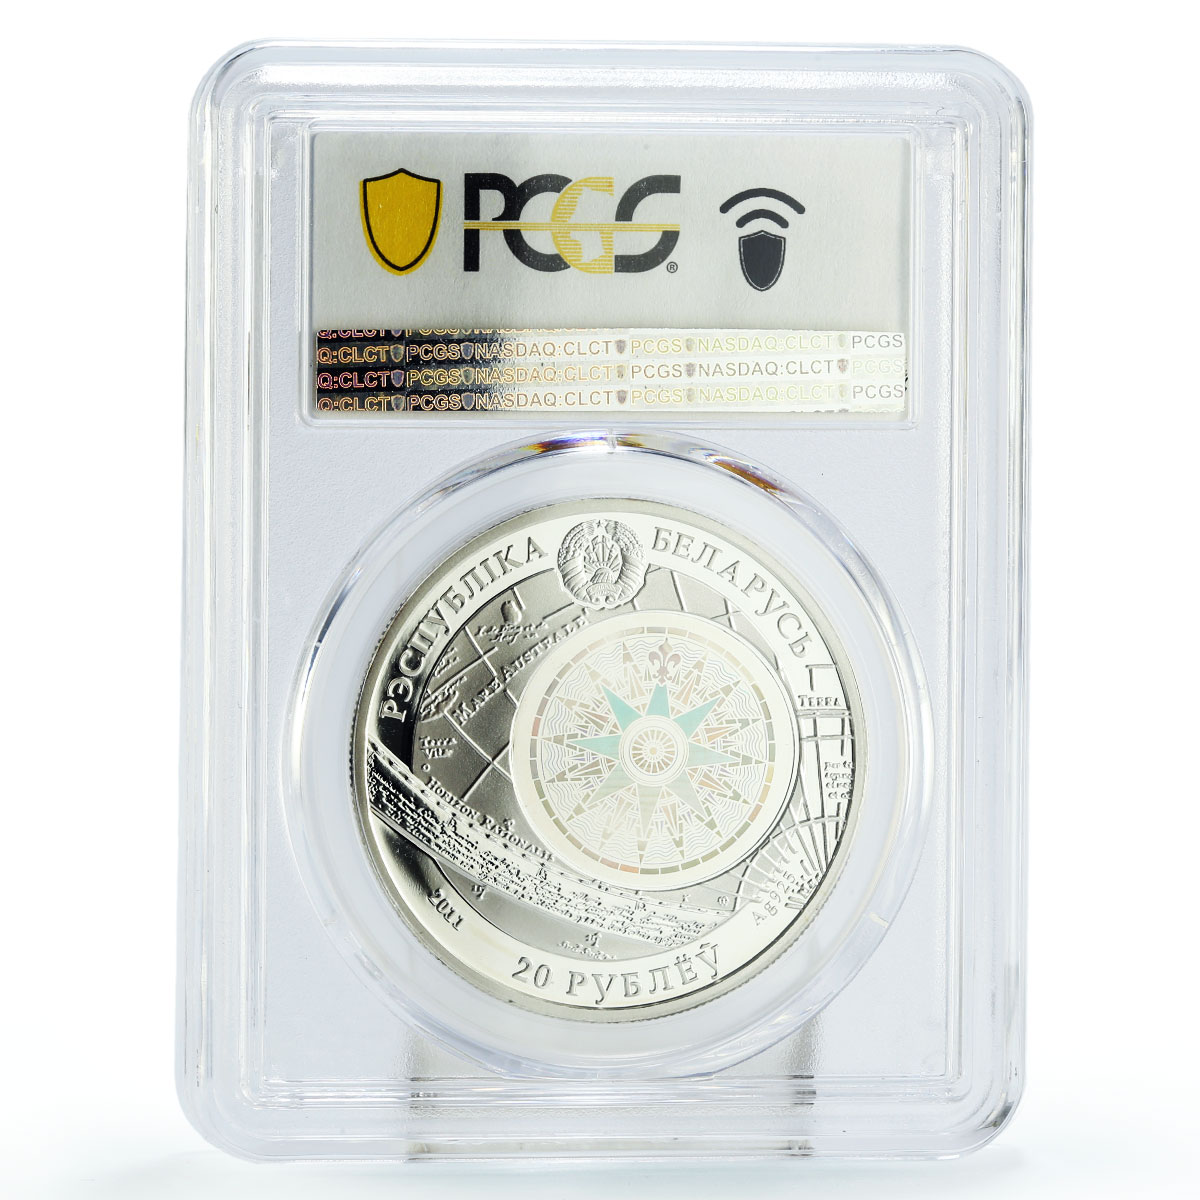 Belarus 20 rubles Cutty Sark Ship Clipper SP70 PCGS hologram silver coin 2011